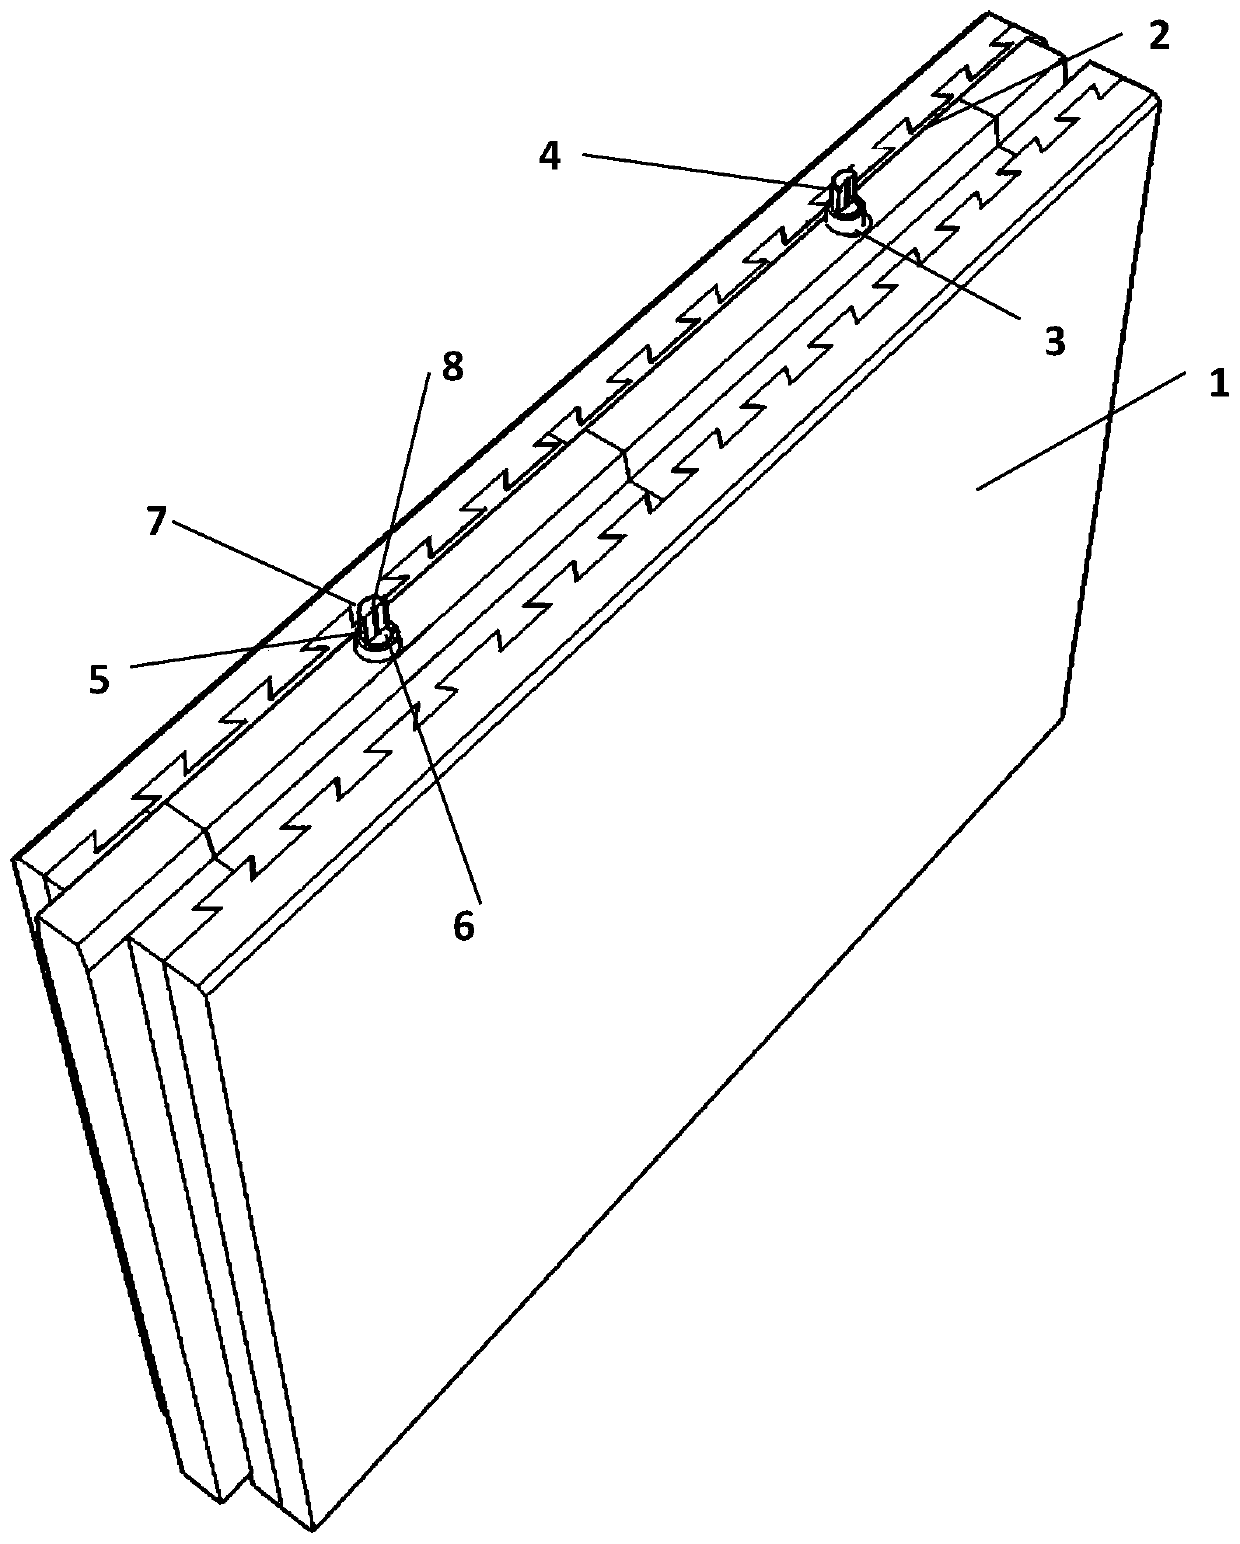 Fabrication method of sandwich thermal insulation inline composite wall with lead pipe-coarse sand energy-dissipating and shock-absorbing key